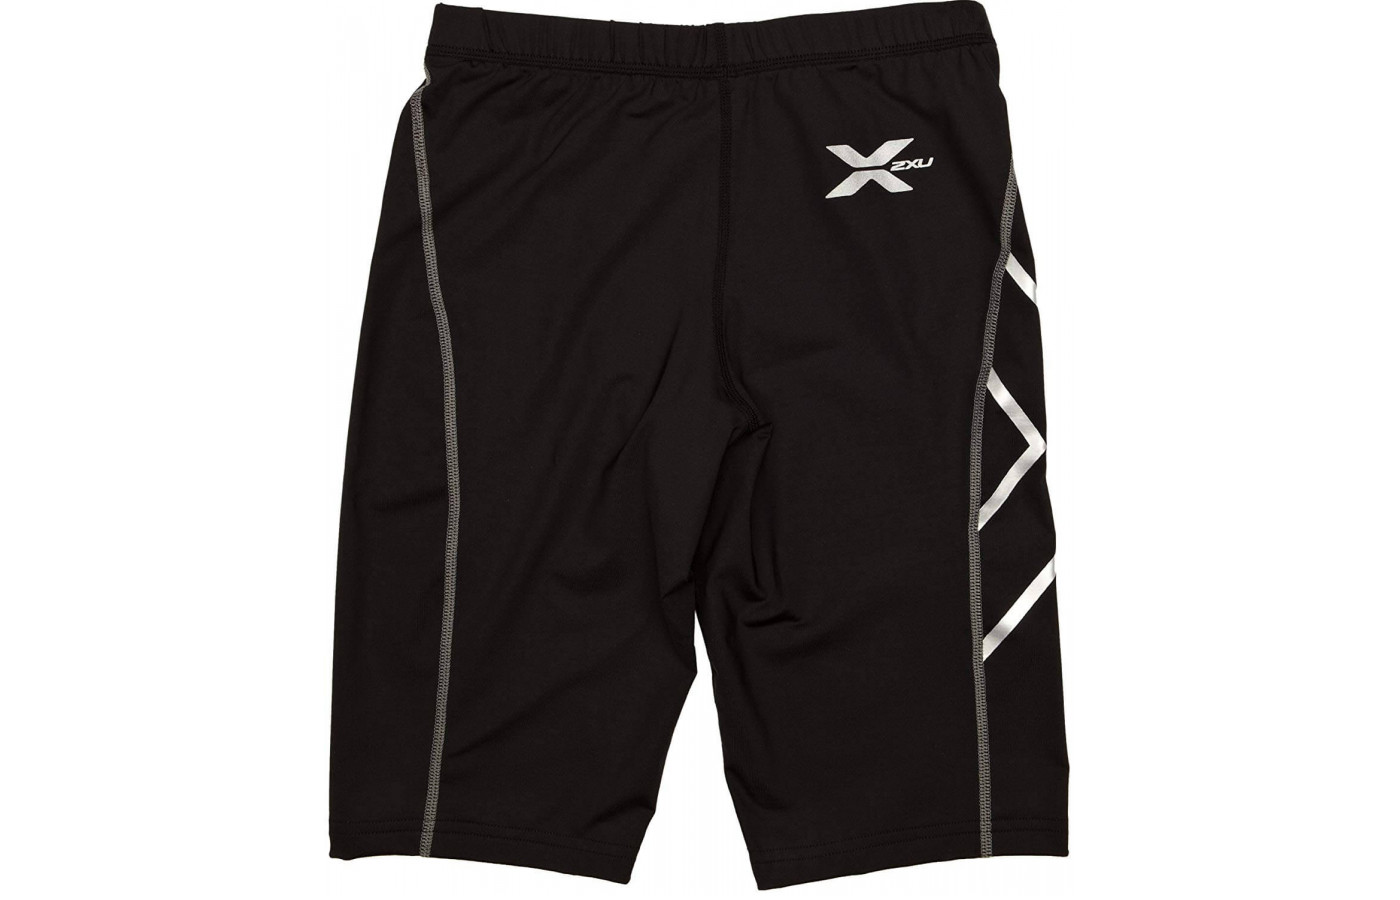 The 2XU Compression Shorts are made from a combination of nylon and elastane.